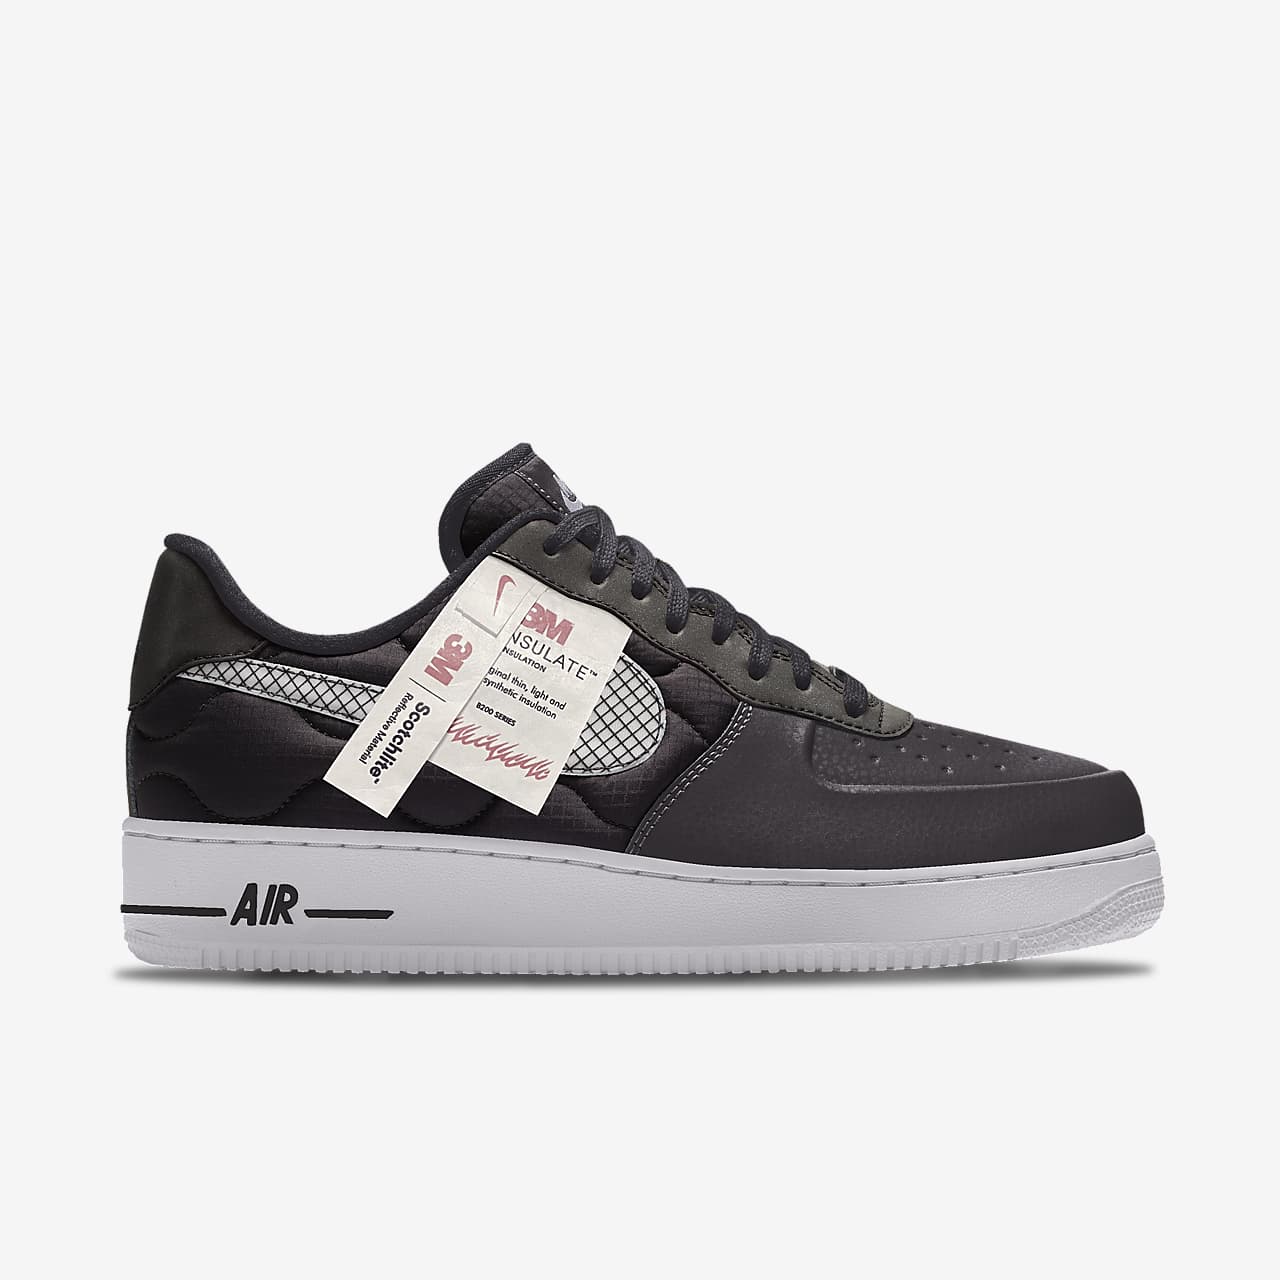 nike air force 1 reflective shoes